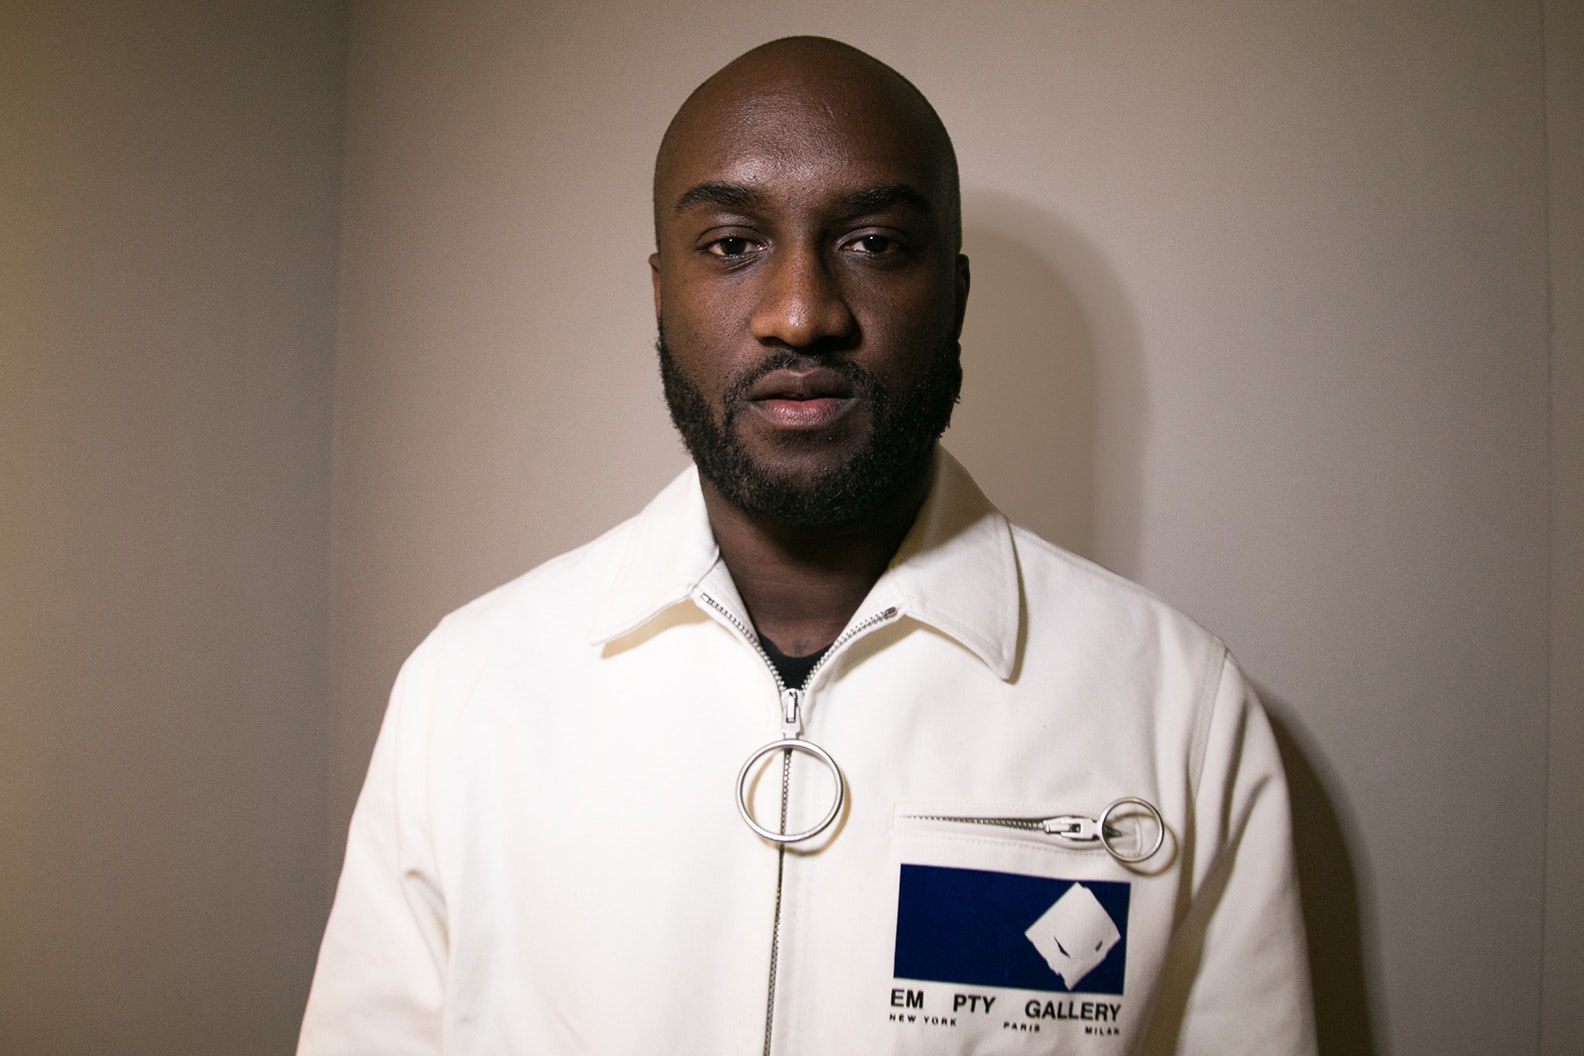 Virgil Abloh Louis Vuitton Fashion Insiders Industry Reactions Thoughts Opinions off-white Kim Jones Angelo Flaccavento Machine-A Stavros Karelis Samuel Ross A-COLD-WALL Polythene Optics Lawrence Schlossman Four Pins Grailed